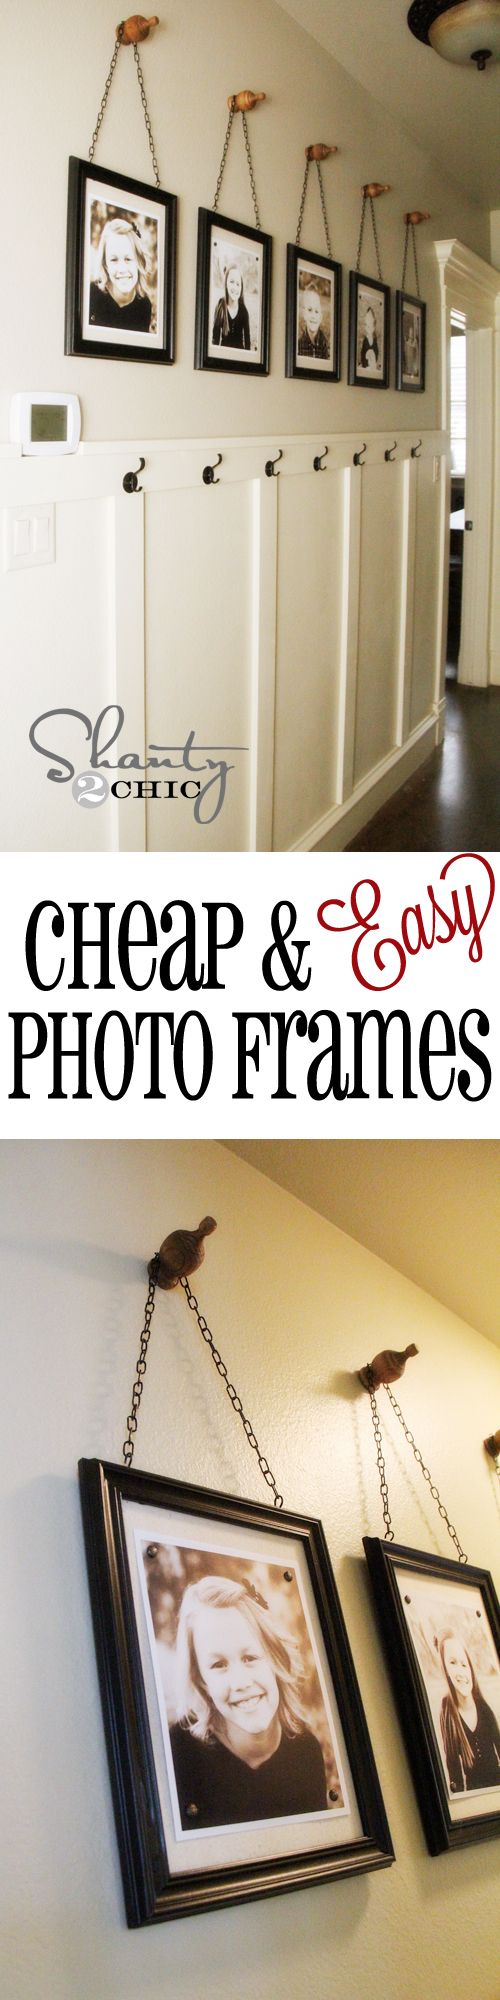 picture hanging ideas shanty 2 chic